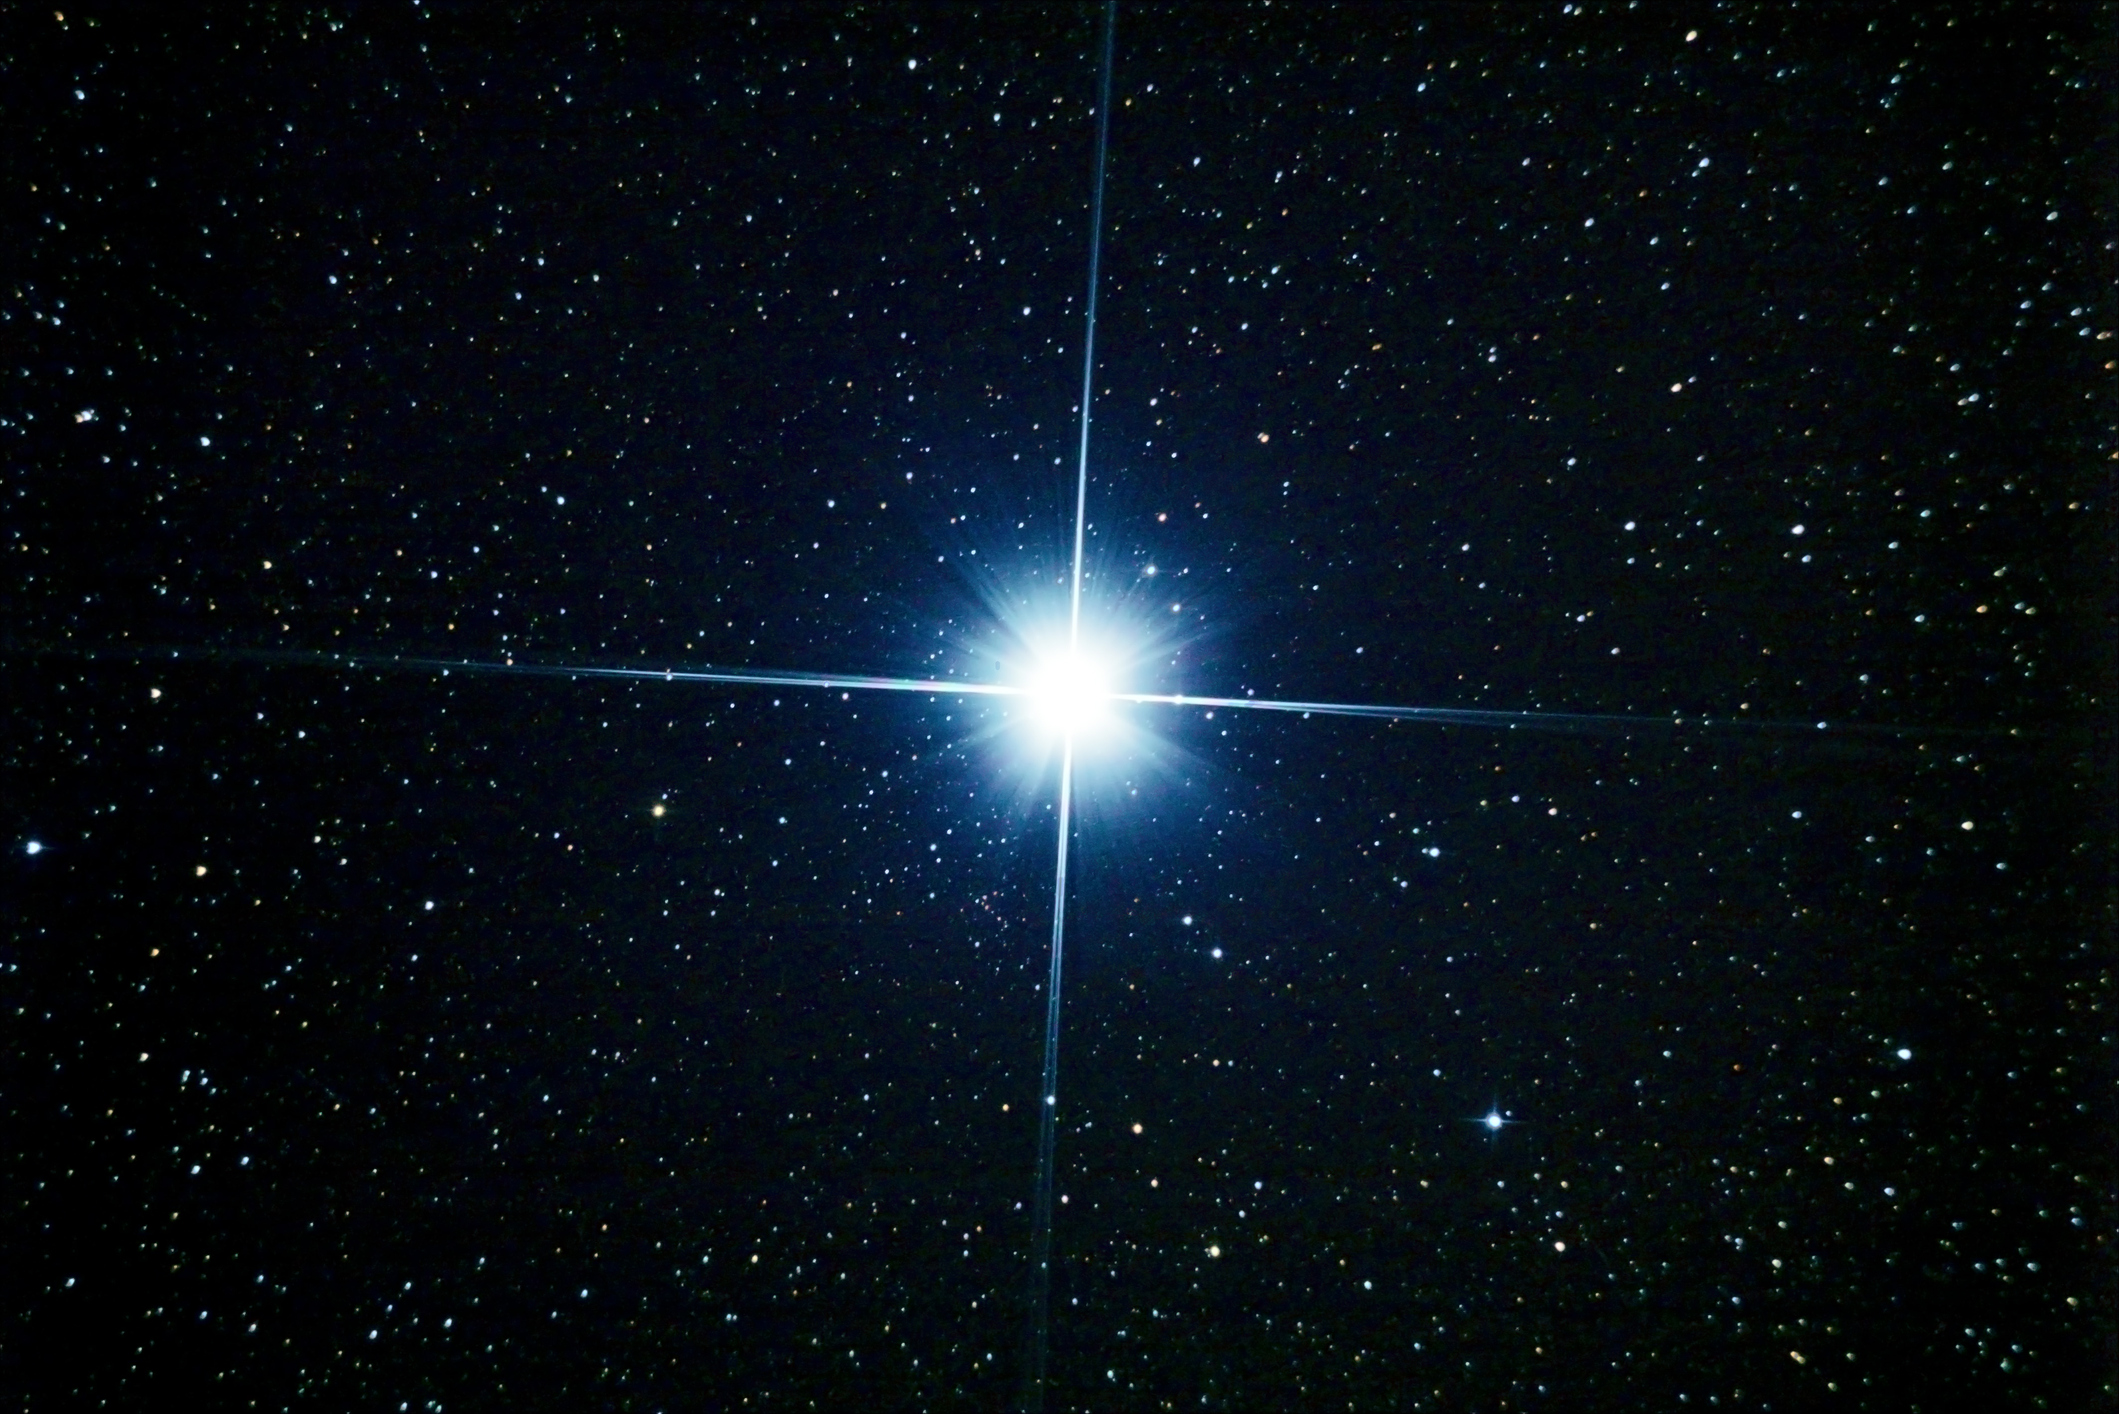 Skywatchers Highly Anticipating Tonight's Christmas Star, Not Seen Since  Over 800 Years Ago